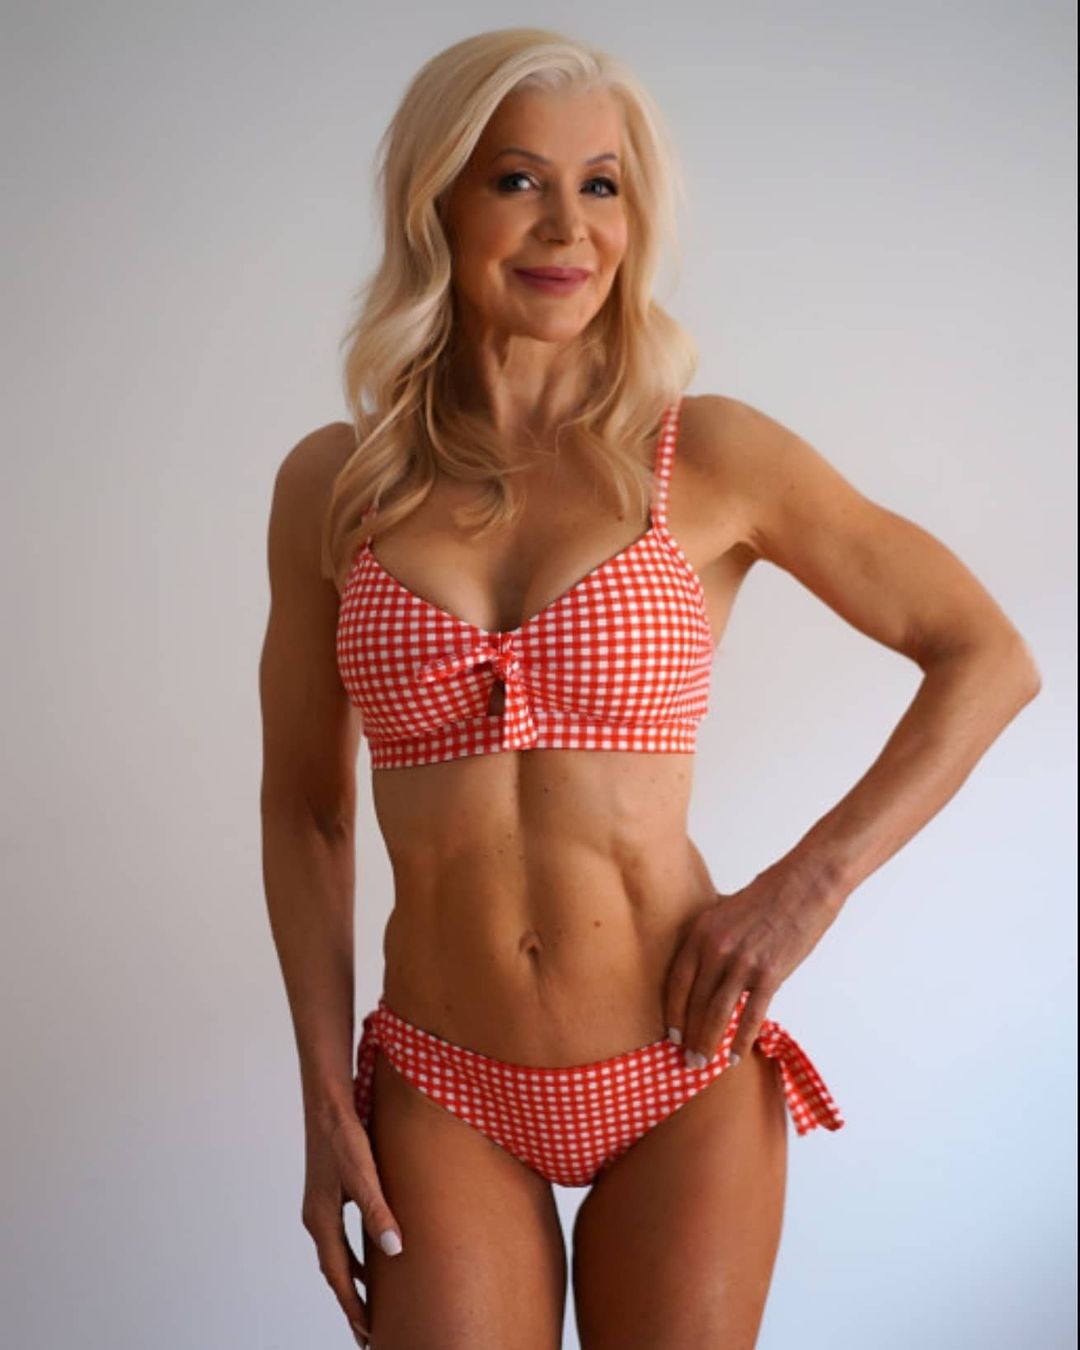 Lesley maxwell fitness